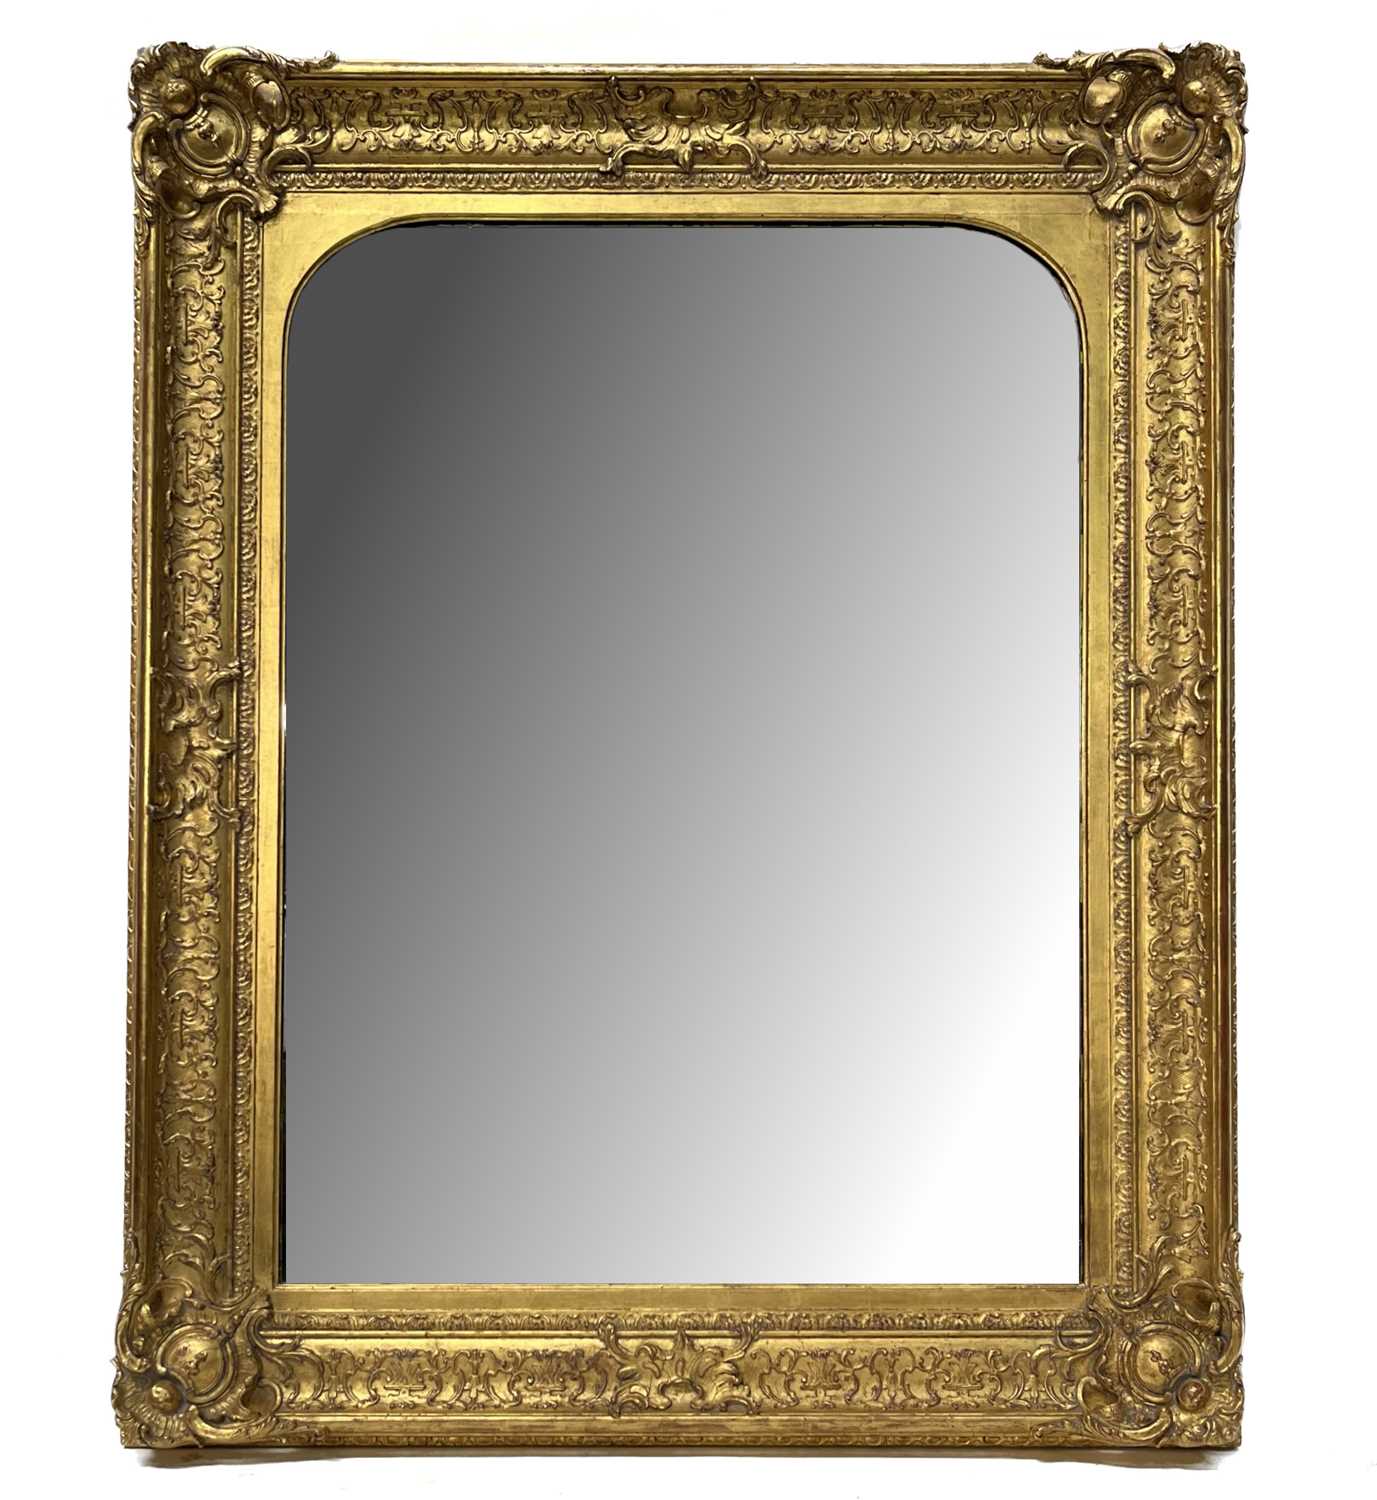 A large rectangular gilt framed wall mirror, late 19th Century, arched plate, fillet, Rococo